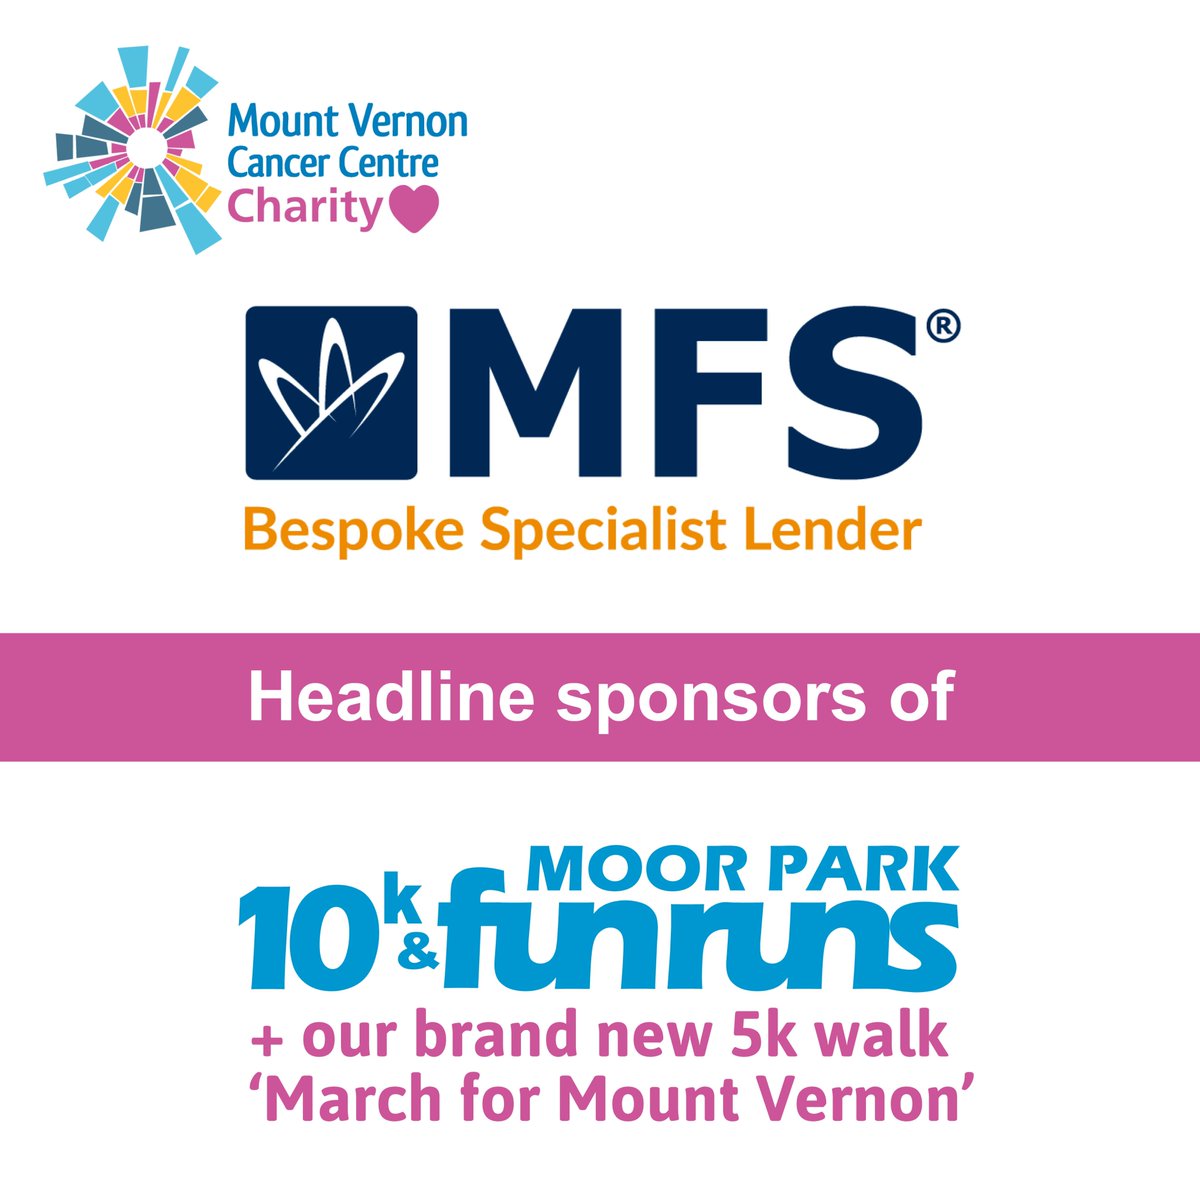 We're delighted to announce that @MFSBridging are our headline sponsors for this year's Moor Park 10k & Fun Runs 🥳 Thank you so much for your support! 💙 Sign up for this popular event at: enhhcharity.org.uk/moorpark24 🏃🏼‍♂️🏃🏼‍♀️